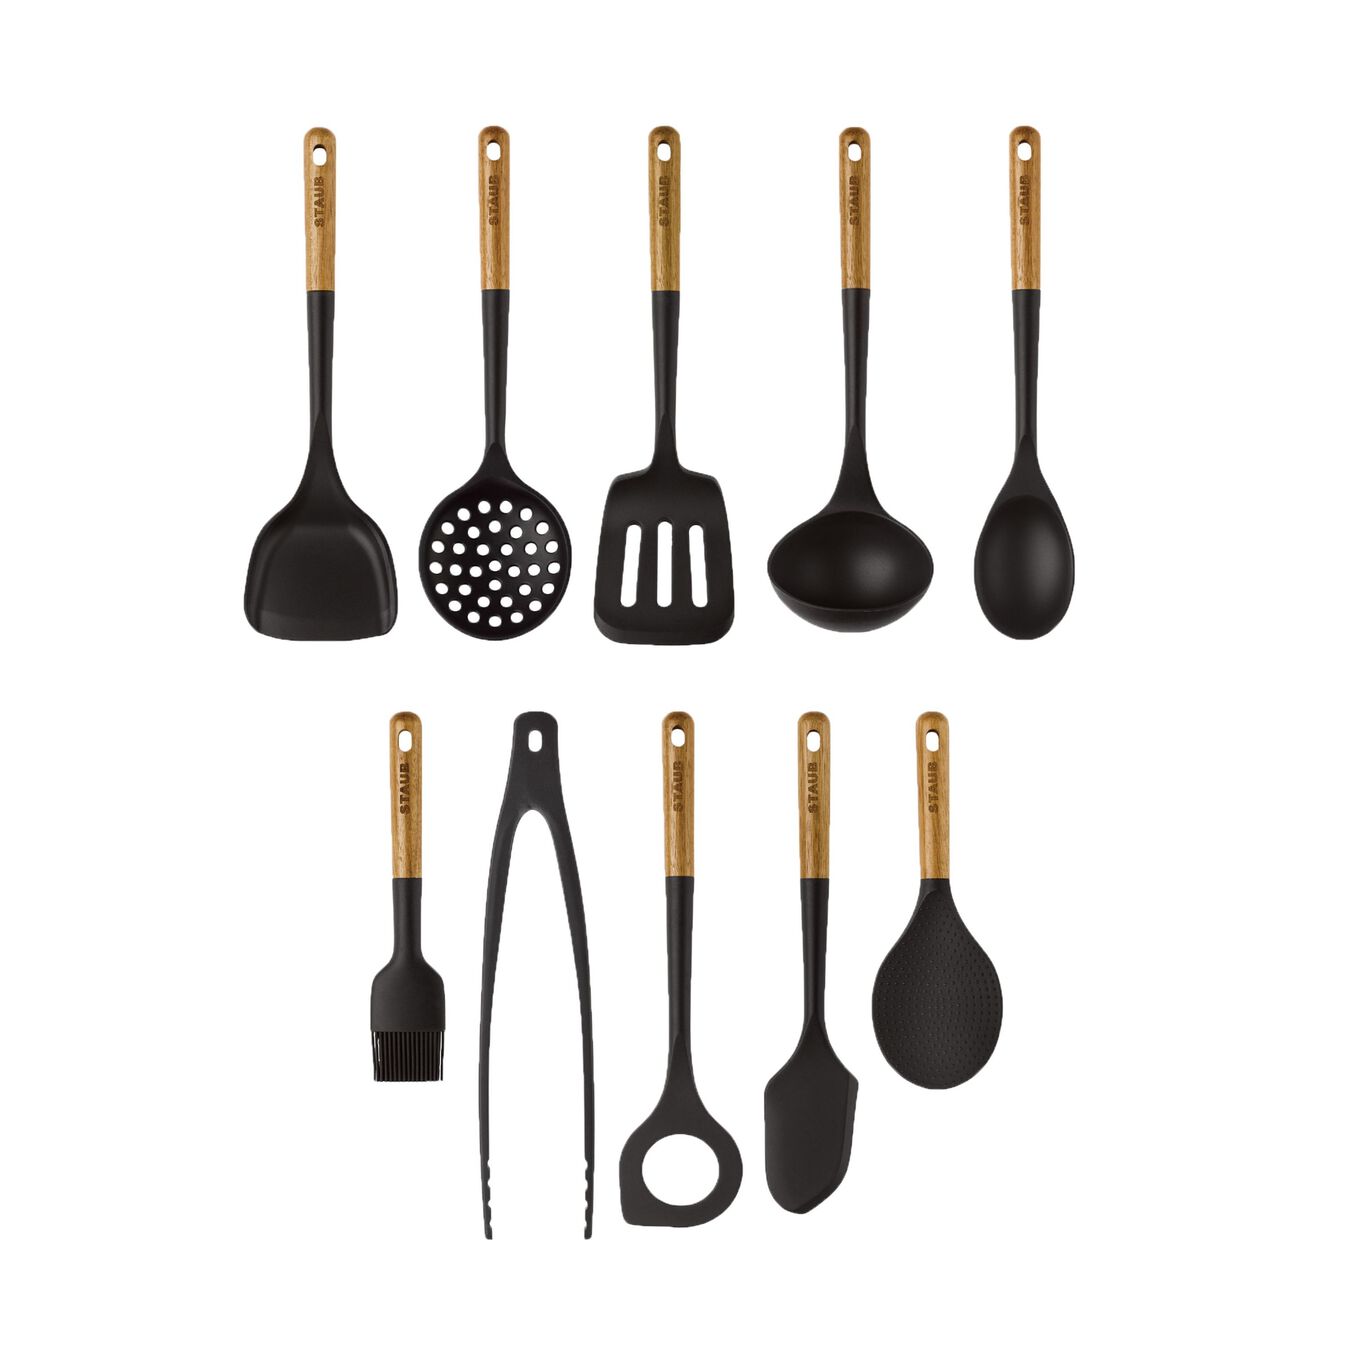 Kitchen Utensils Set Rose Gold Stainless Steel and Silicone 10 Pcs Cooking Set